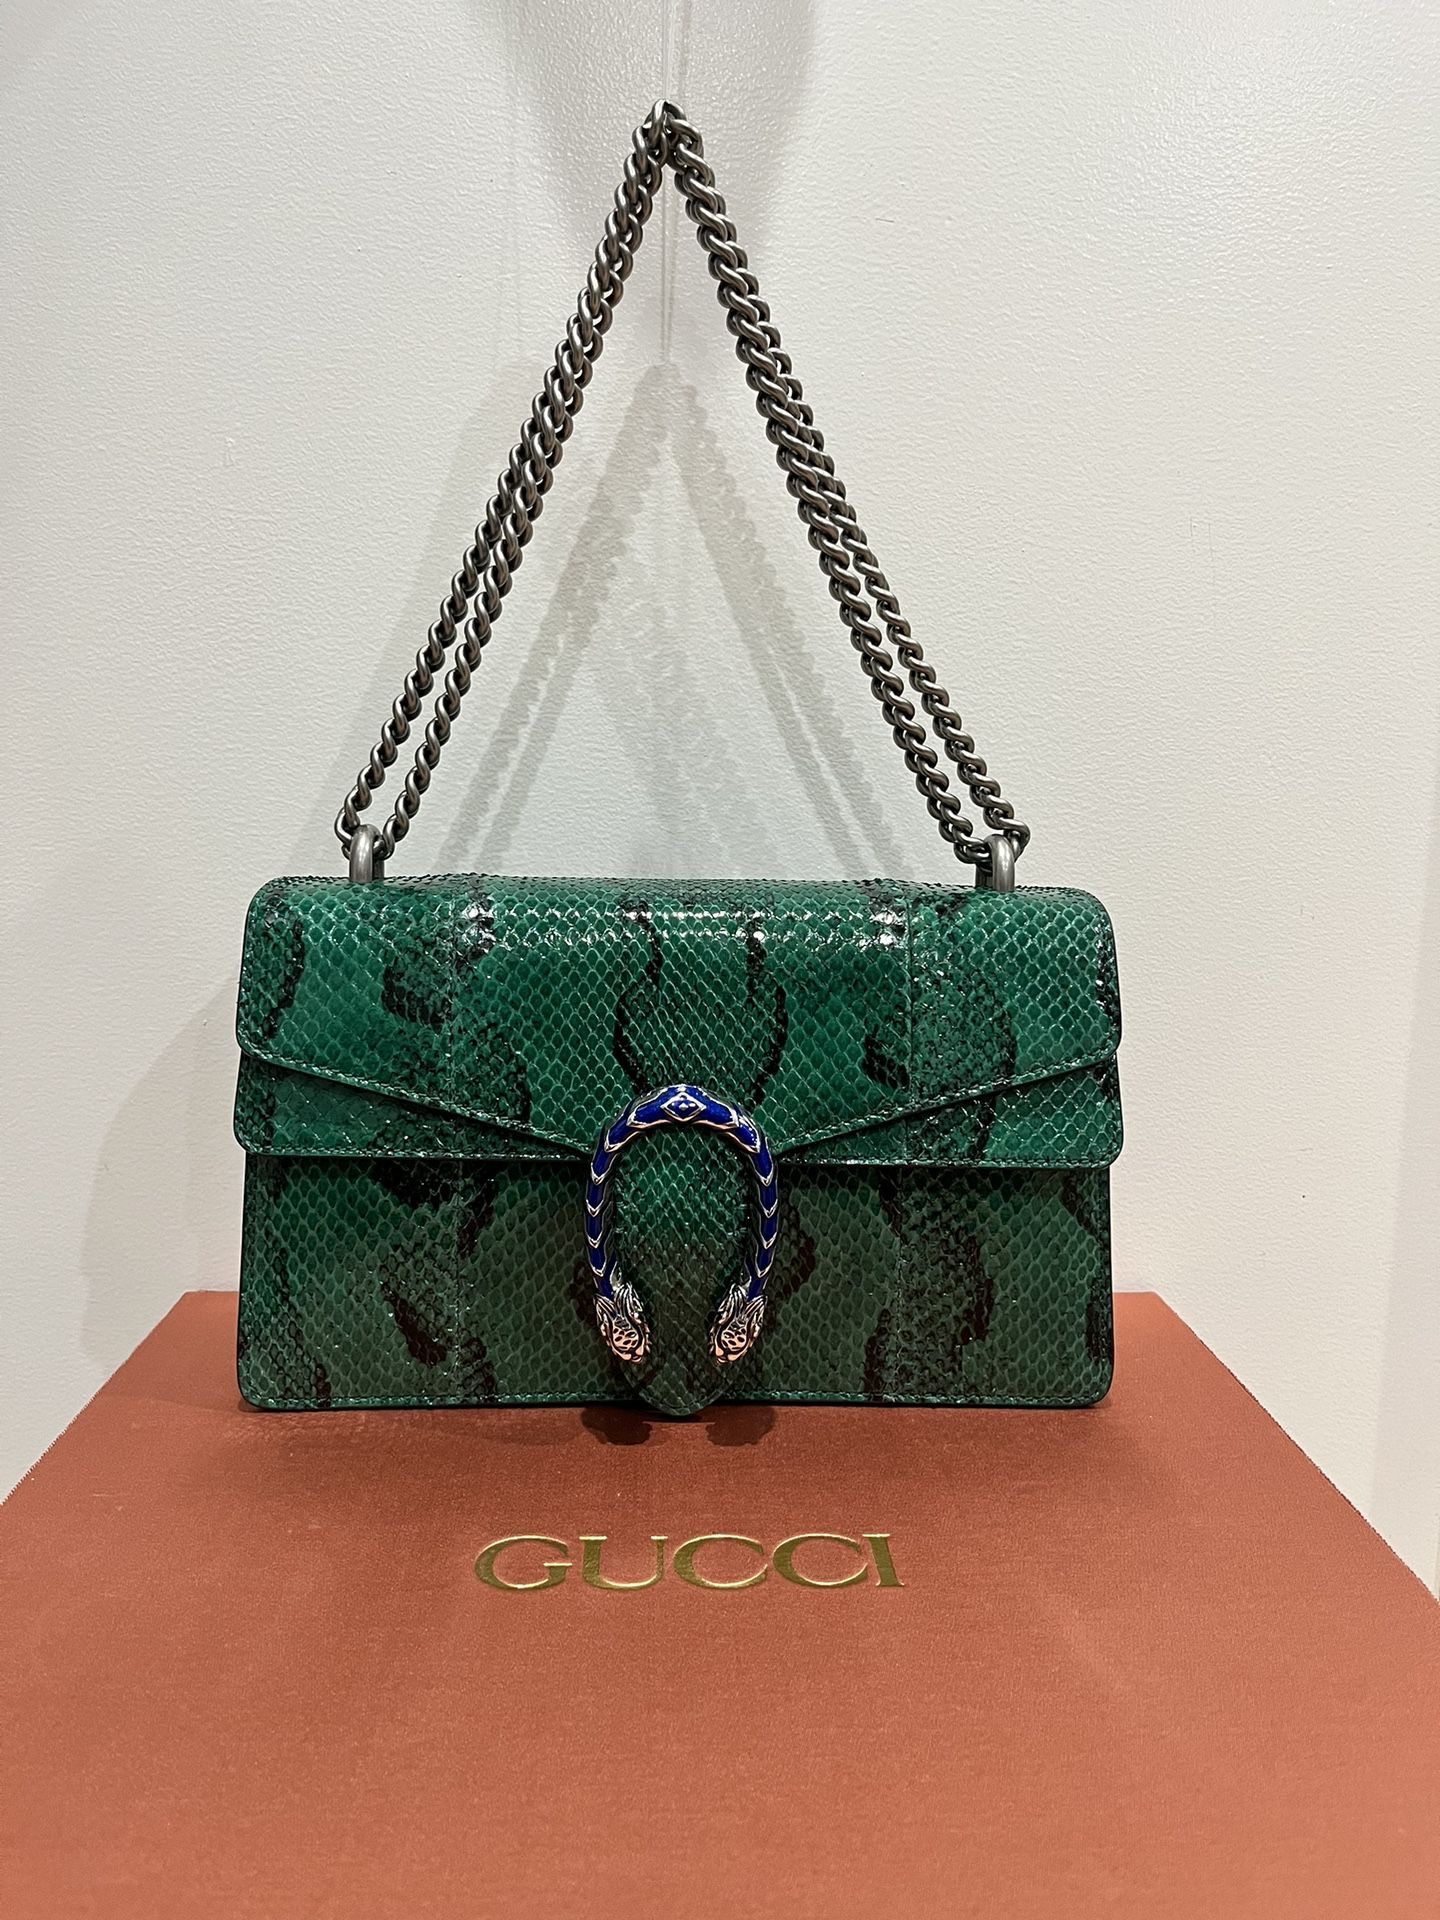 Gucci Green Python Bag for Sale in Glendale, CA - OfferUp